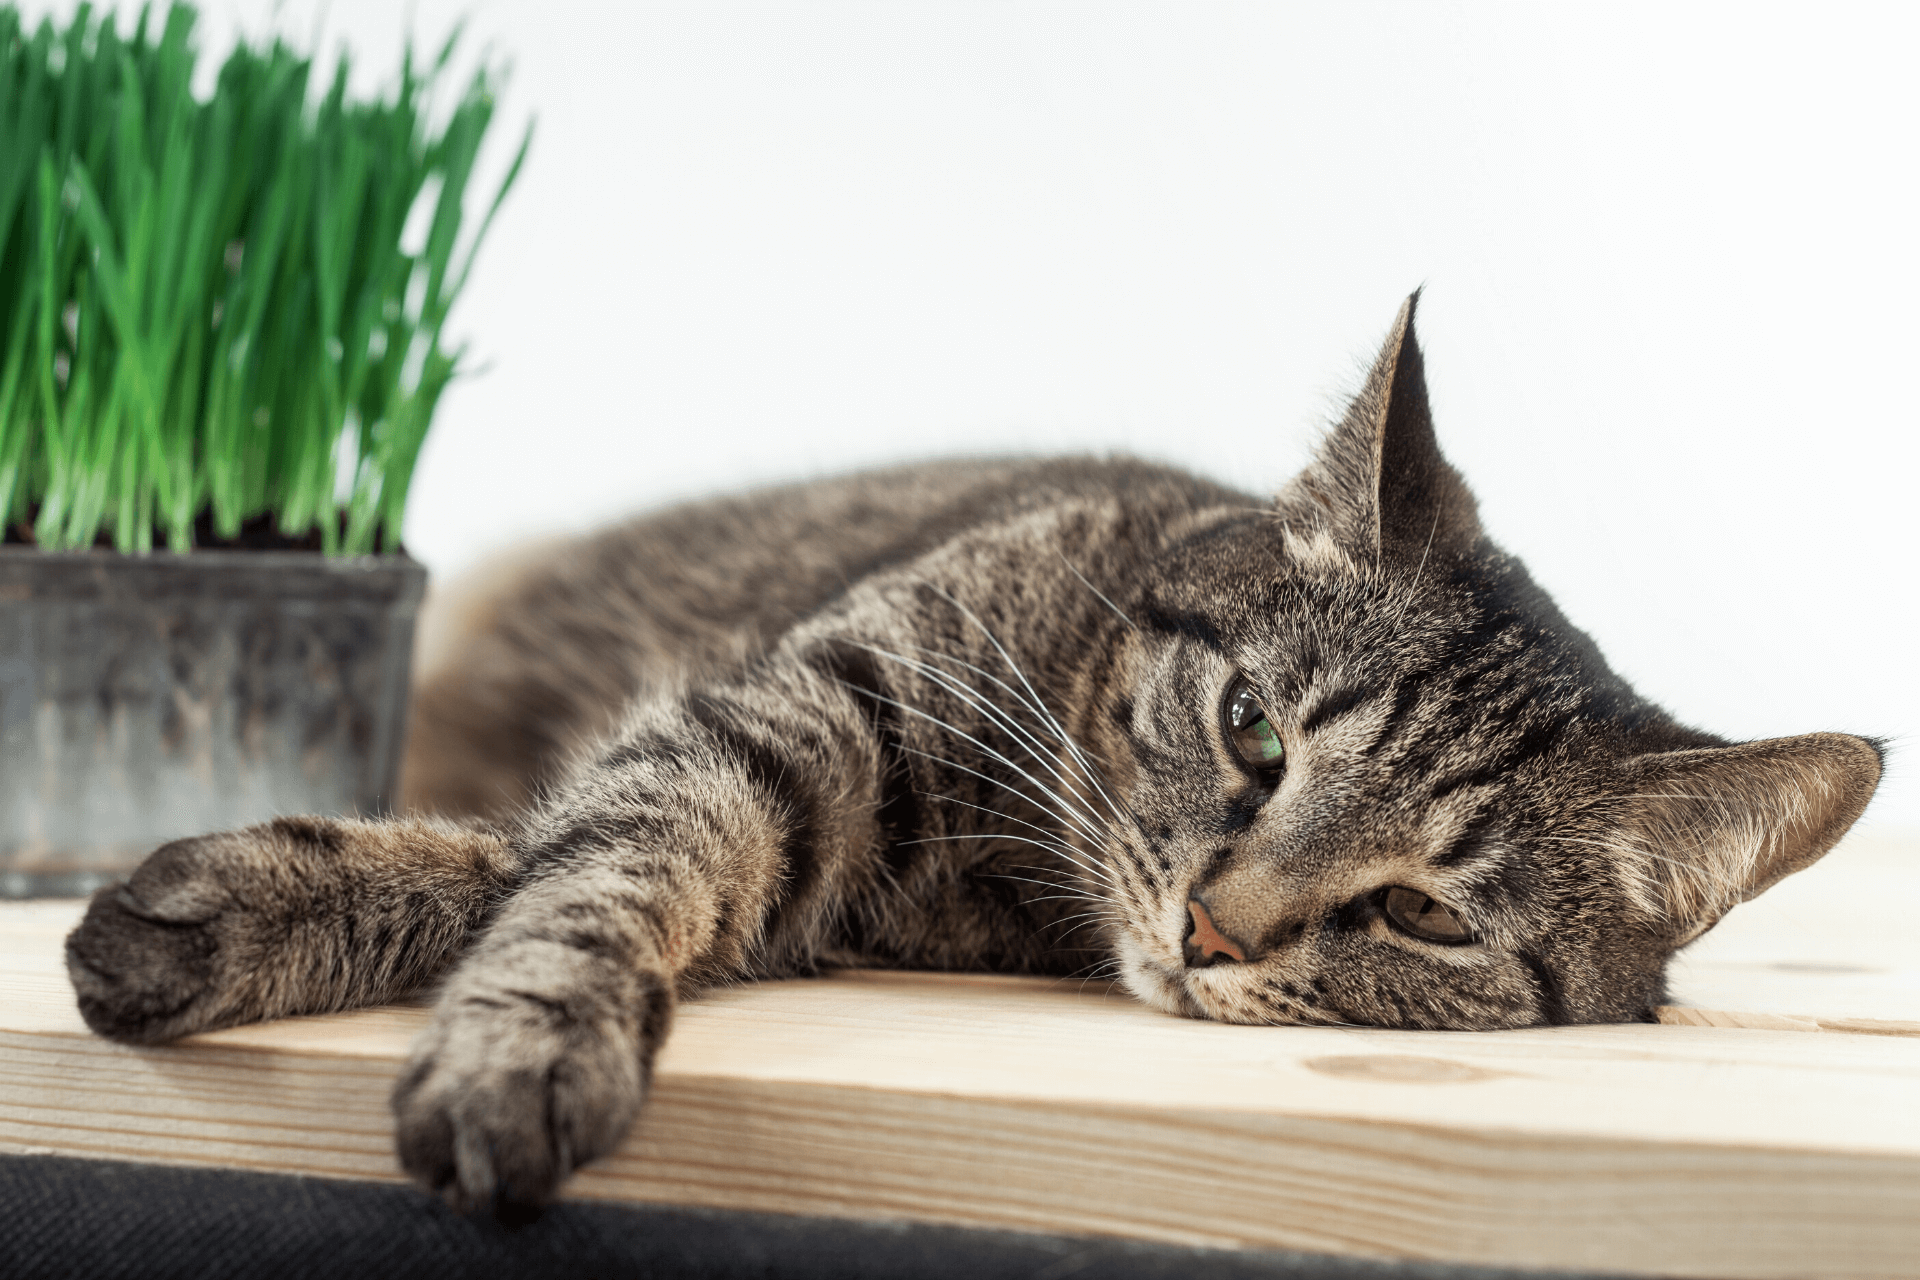 Foods that can make cats sick